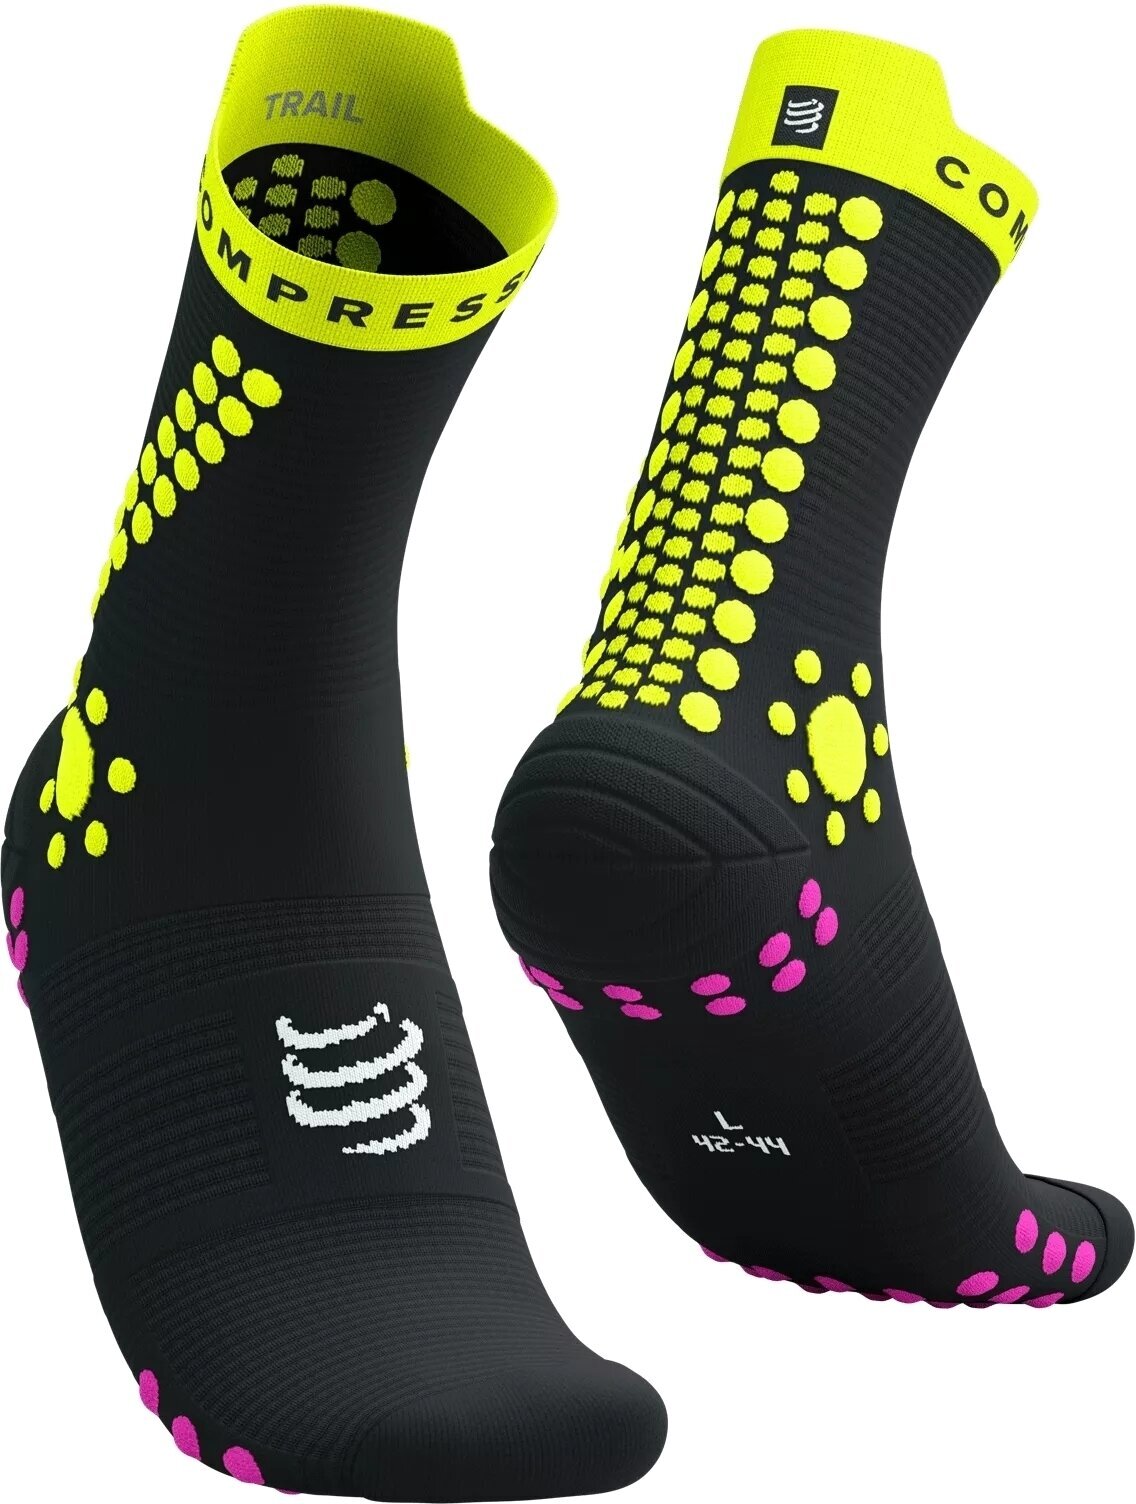 Calcetines para correr Compressport Pro Racing Socks V4.0 Trail Black/Safety Yellow/Neon Pink T2 Calcetines para correr